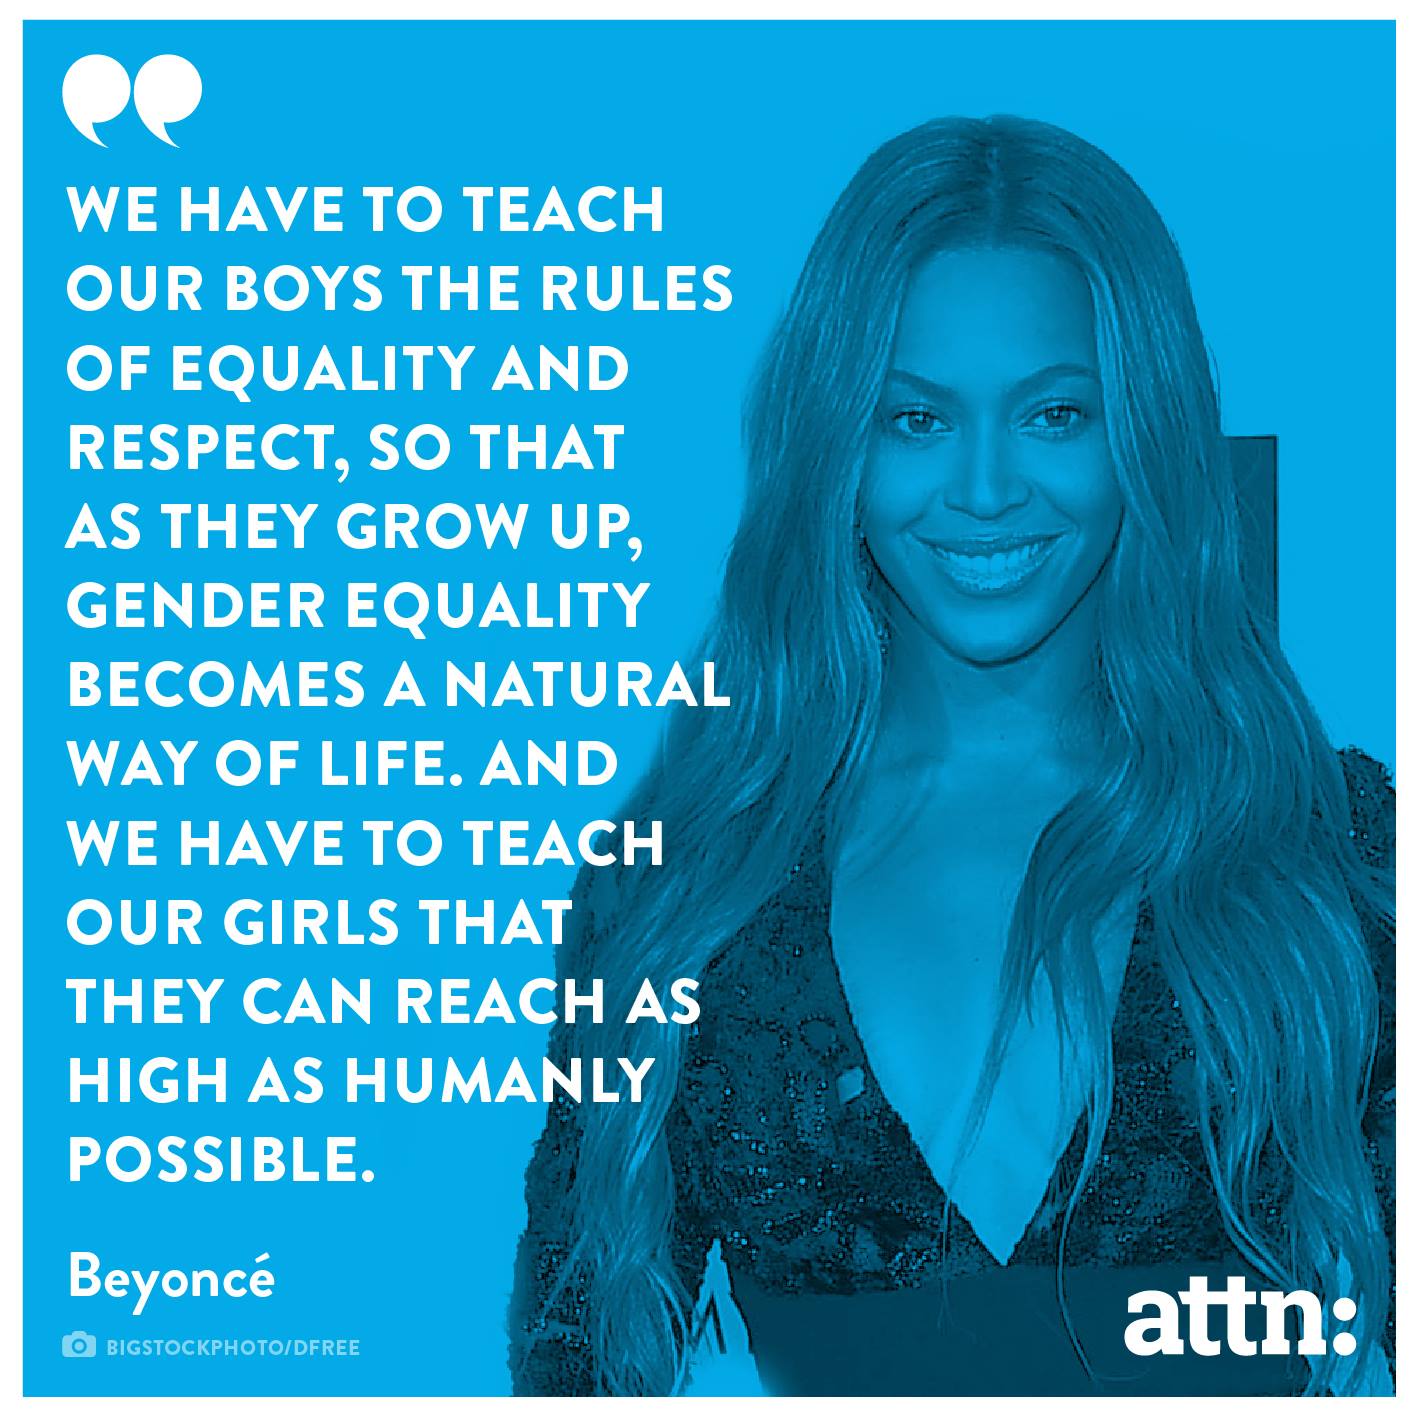 Empowering words from Beyoncé.